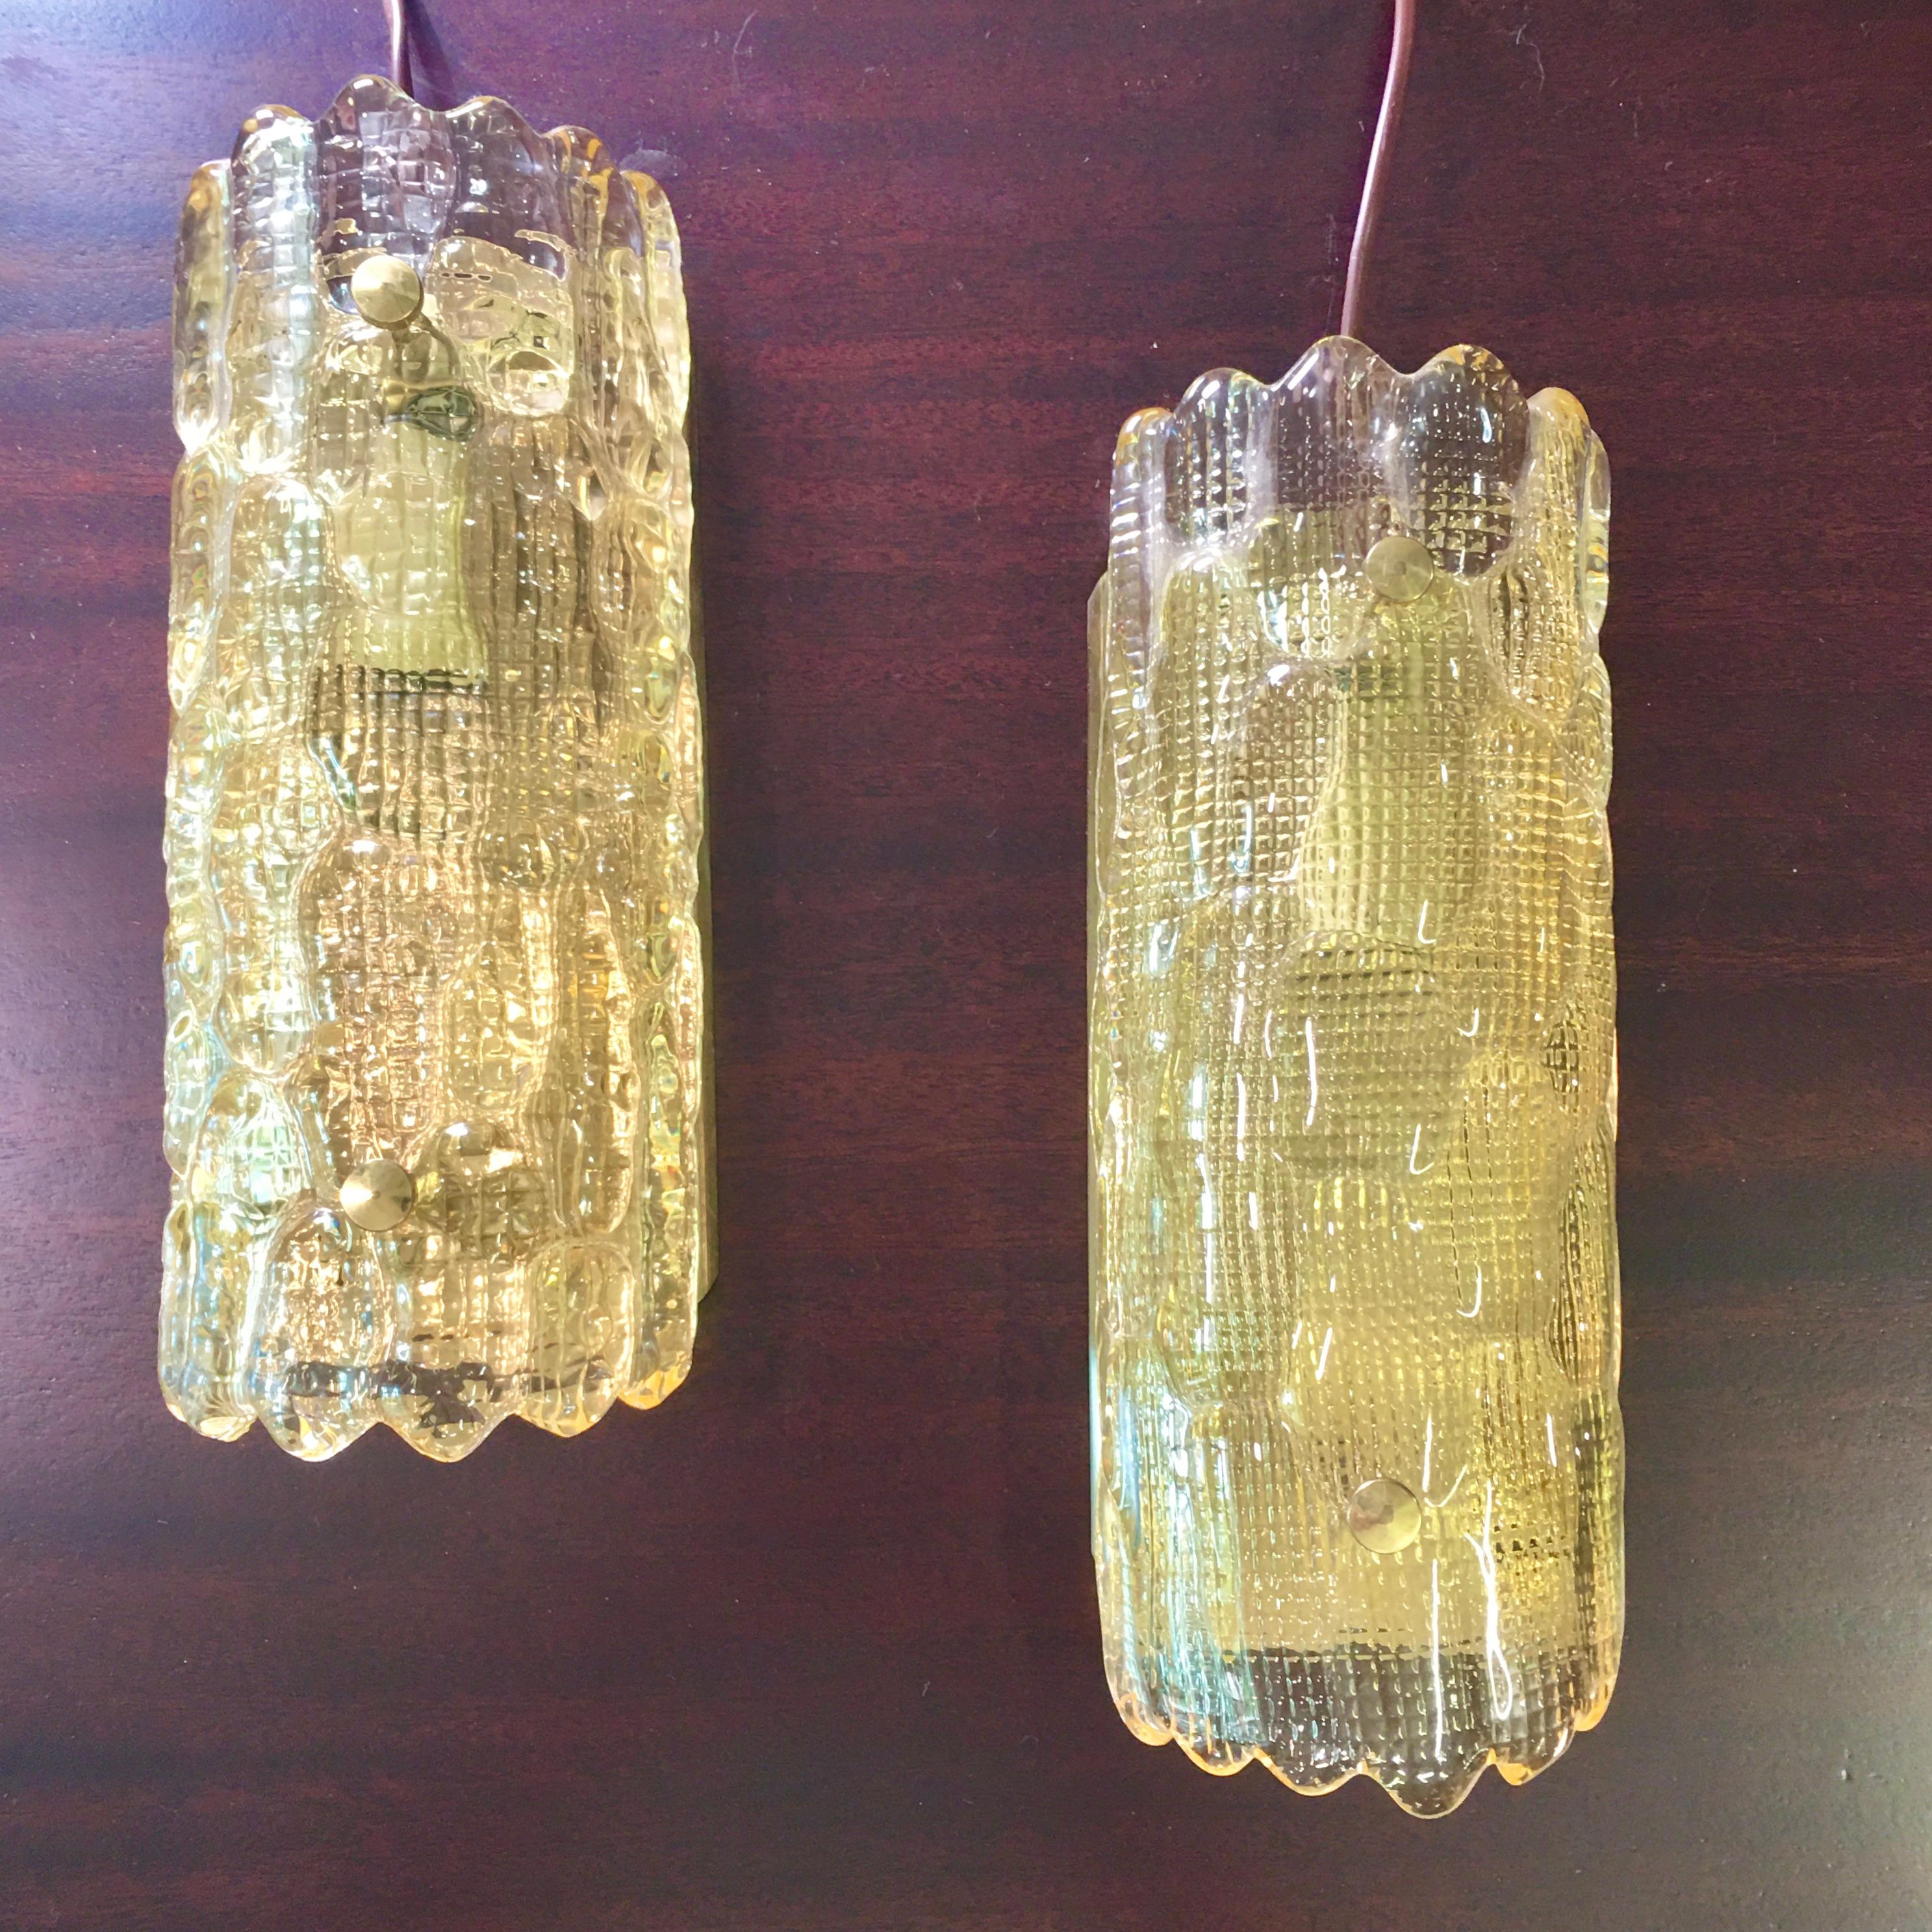 Pair of Large Orrefors Glass Wall Lights / Sconces by Carl Fagerlund  with brass fittings for Orrefors Sweden, signed. 
Currently corded with switch and euro plug. Will convert to be hardwired for USA if requested.